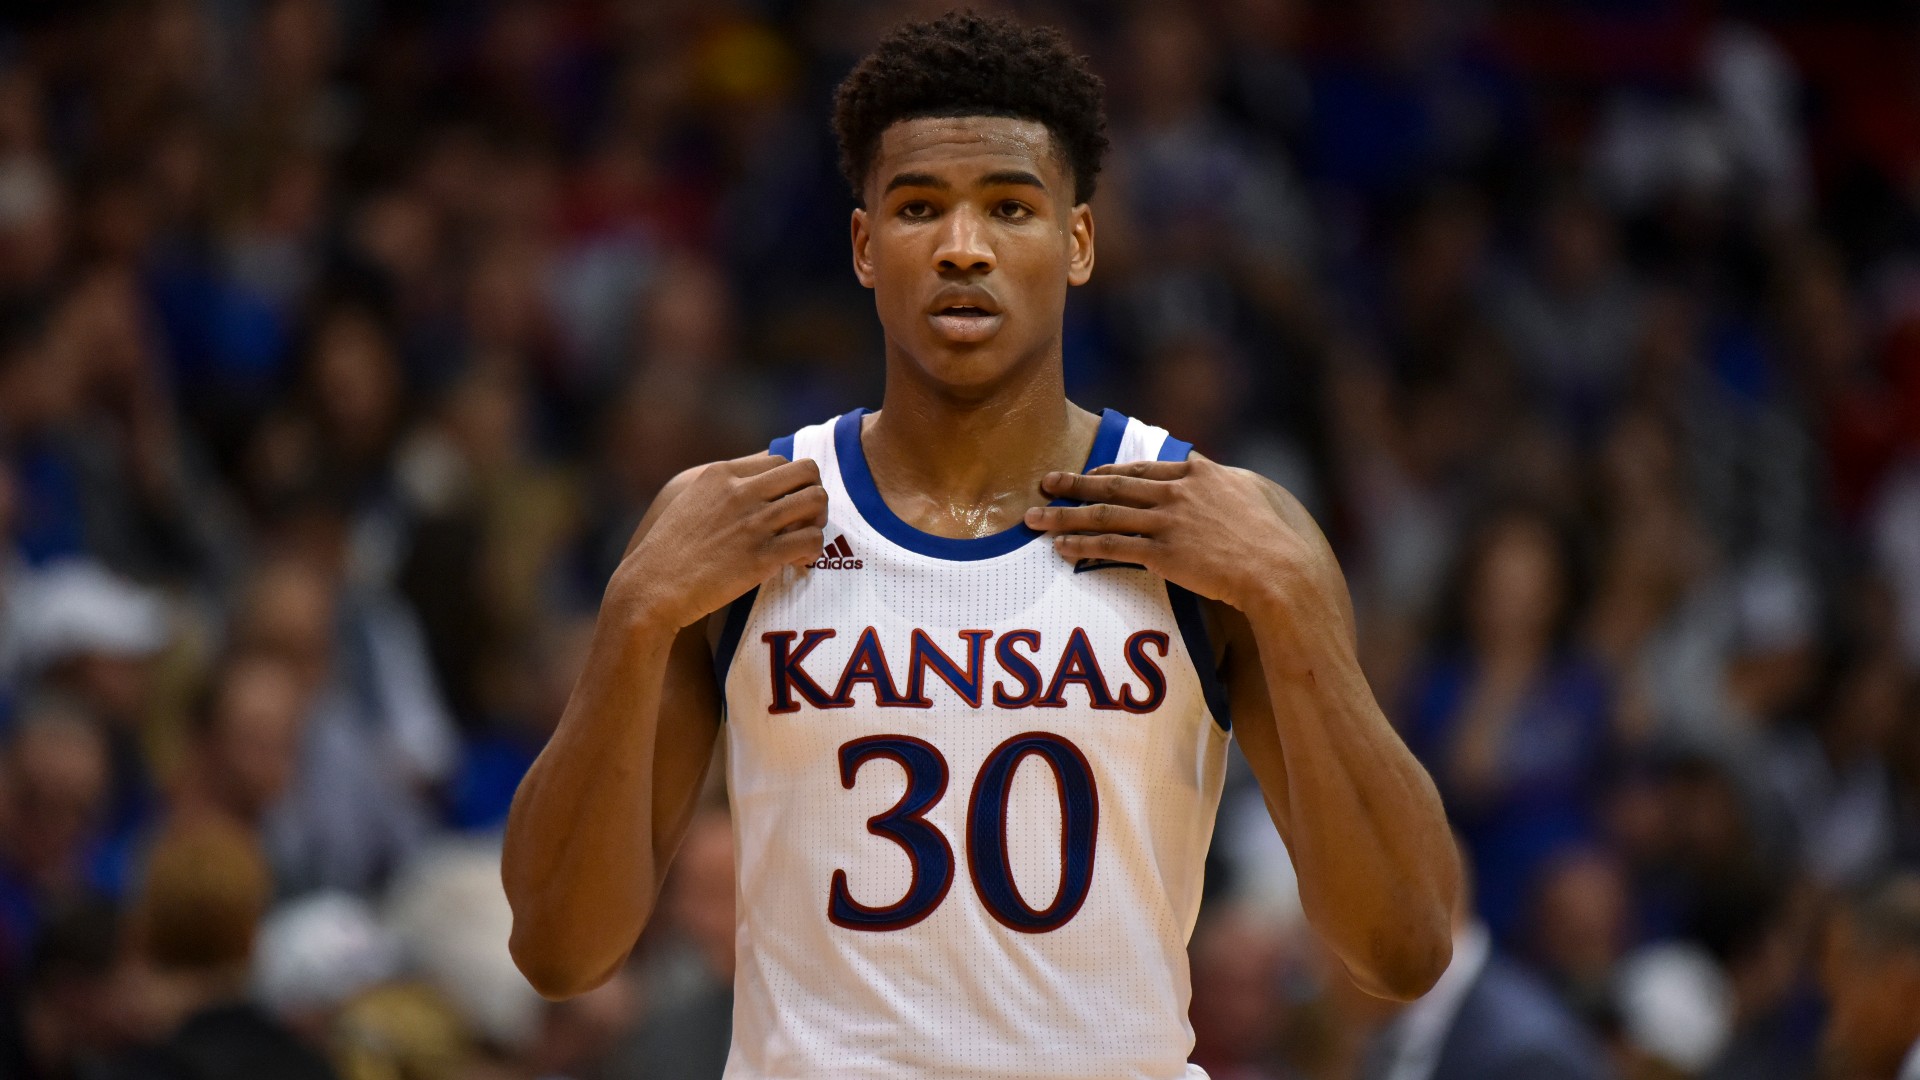 Kansas vs. Kentucky Odds & Best Bet: The Jayhawks Can Cover Spread Against Wildcats article feature image